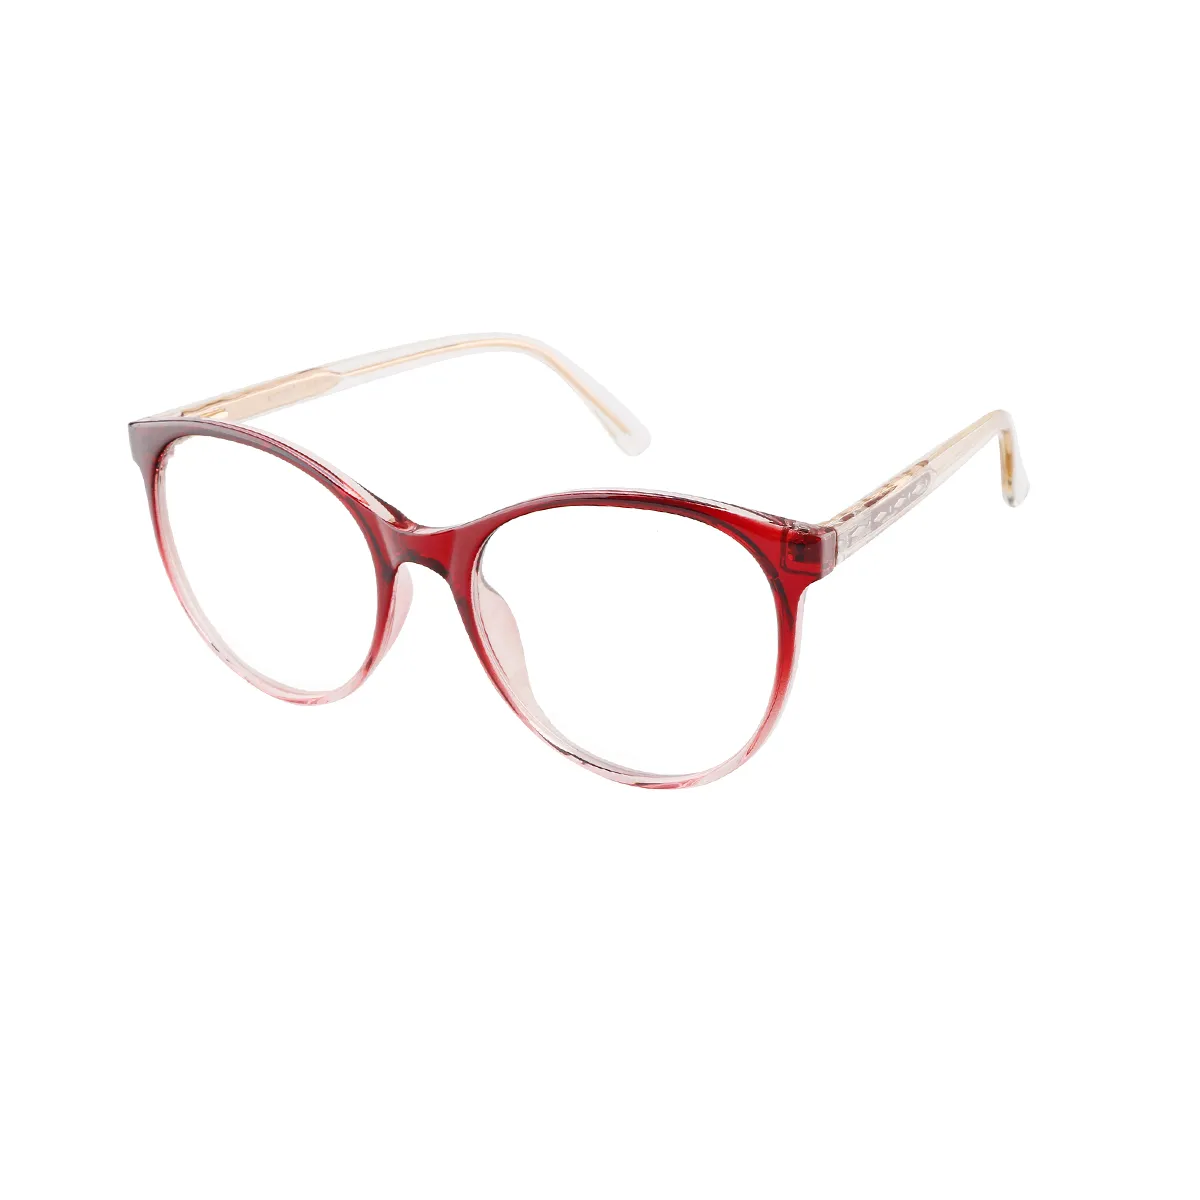 Goldie - Round  Glasses for Women